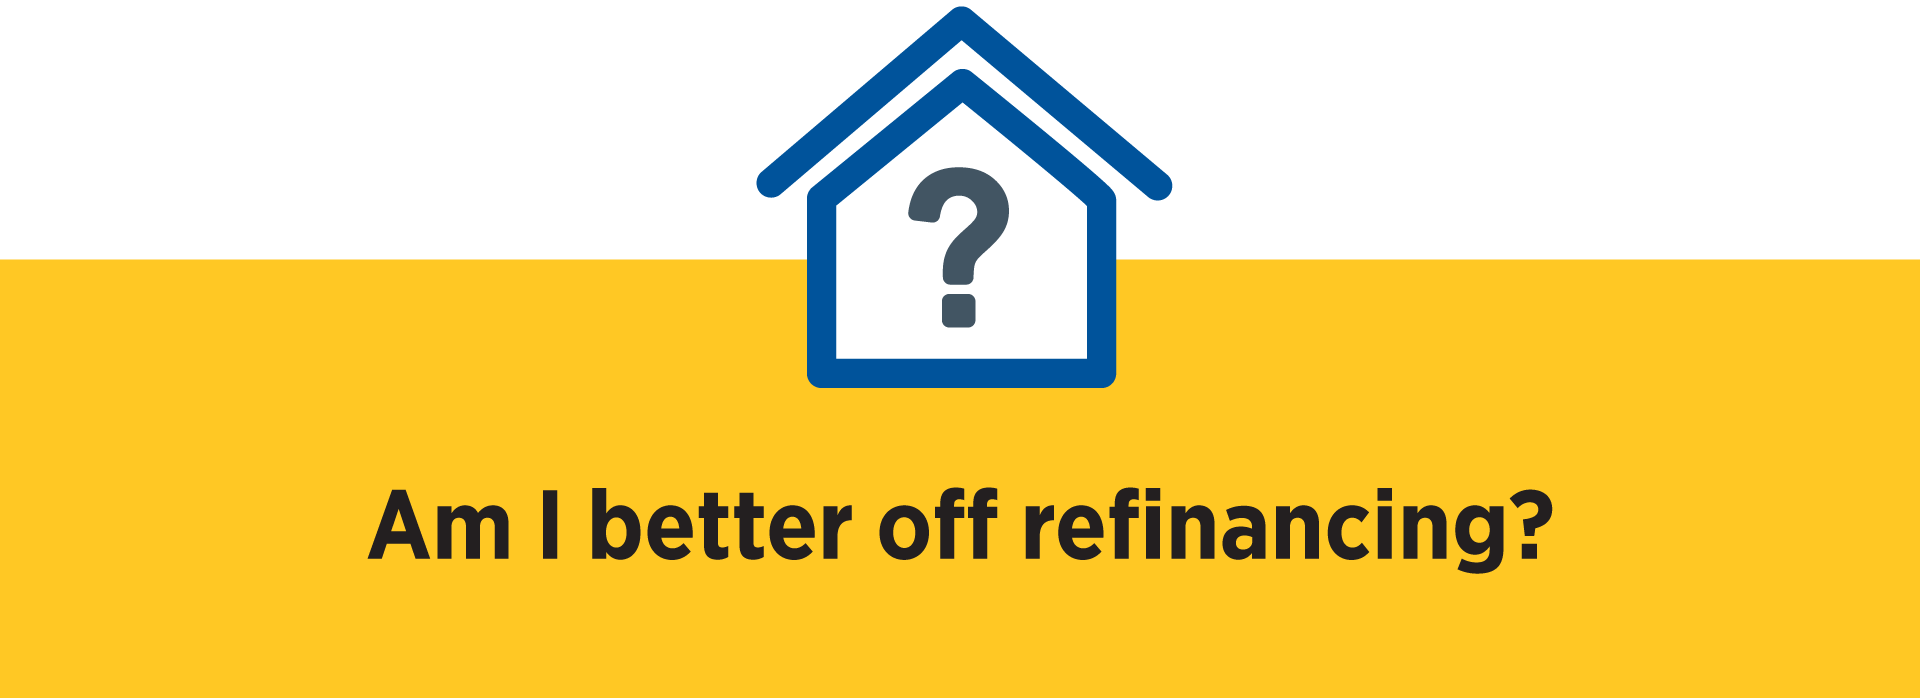 Mortgage Calculator Icons Am I better off refinancing